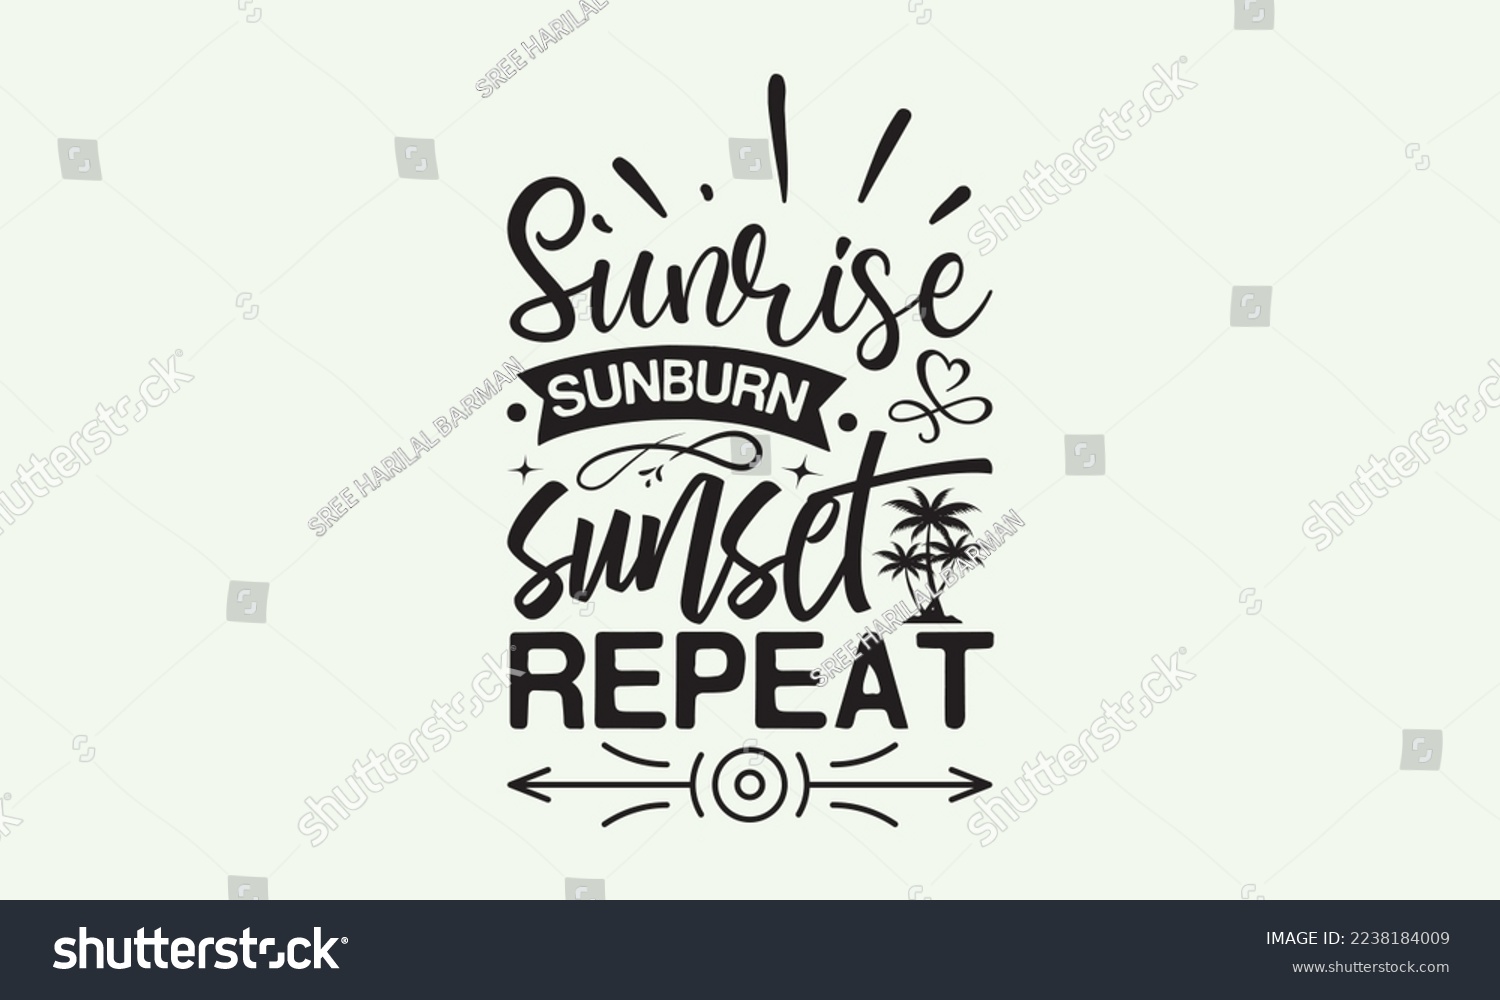 SVG of Sunrise sunburn sunset repeat - President's day T-shirt Design, File Sports SVG Design, Sports typography t-shirt design, For stickers, Templet, mugs, etc. for Cutting, cards, and flyers. svg